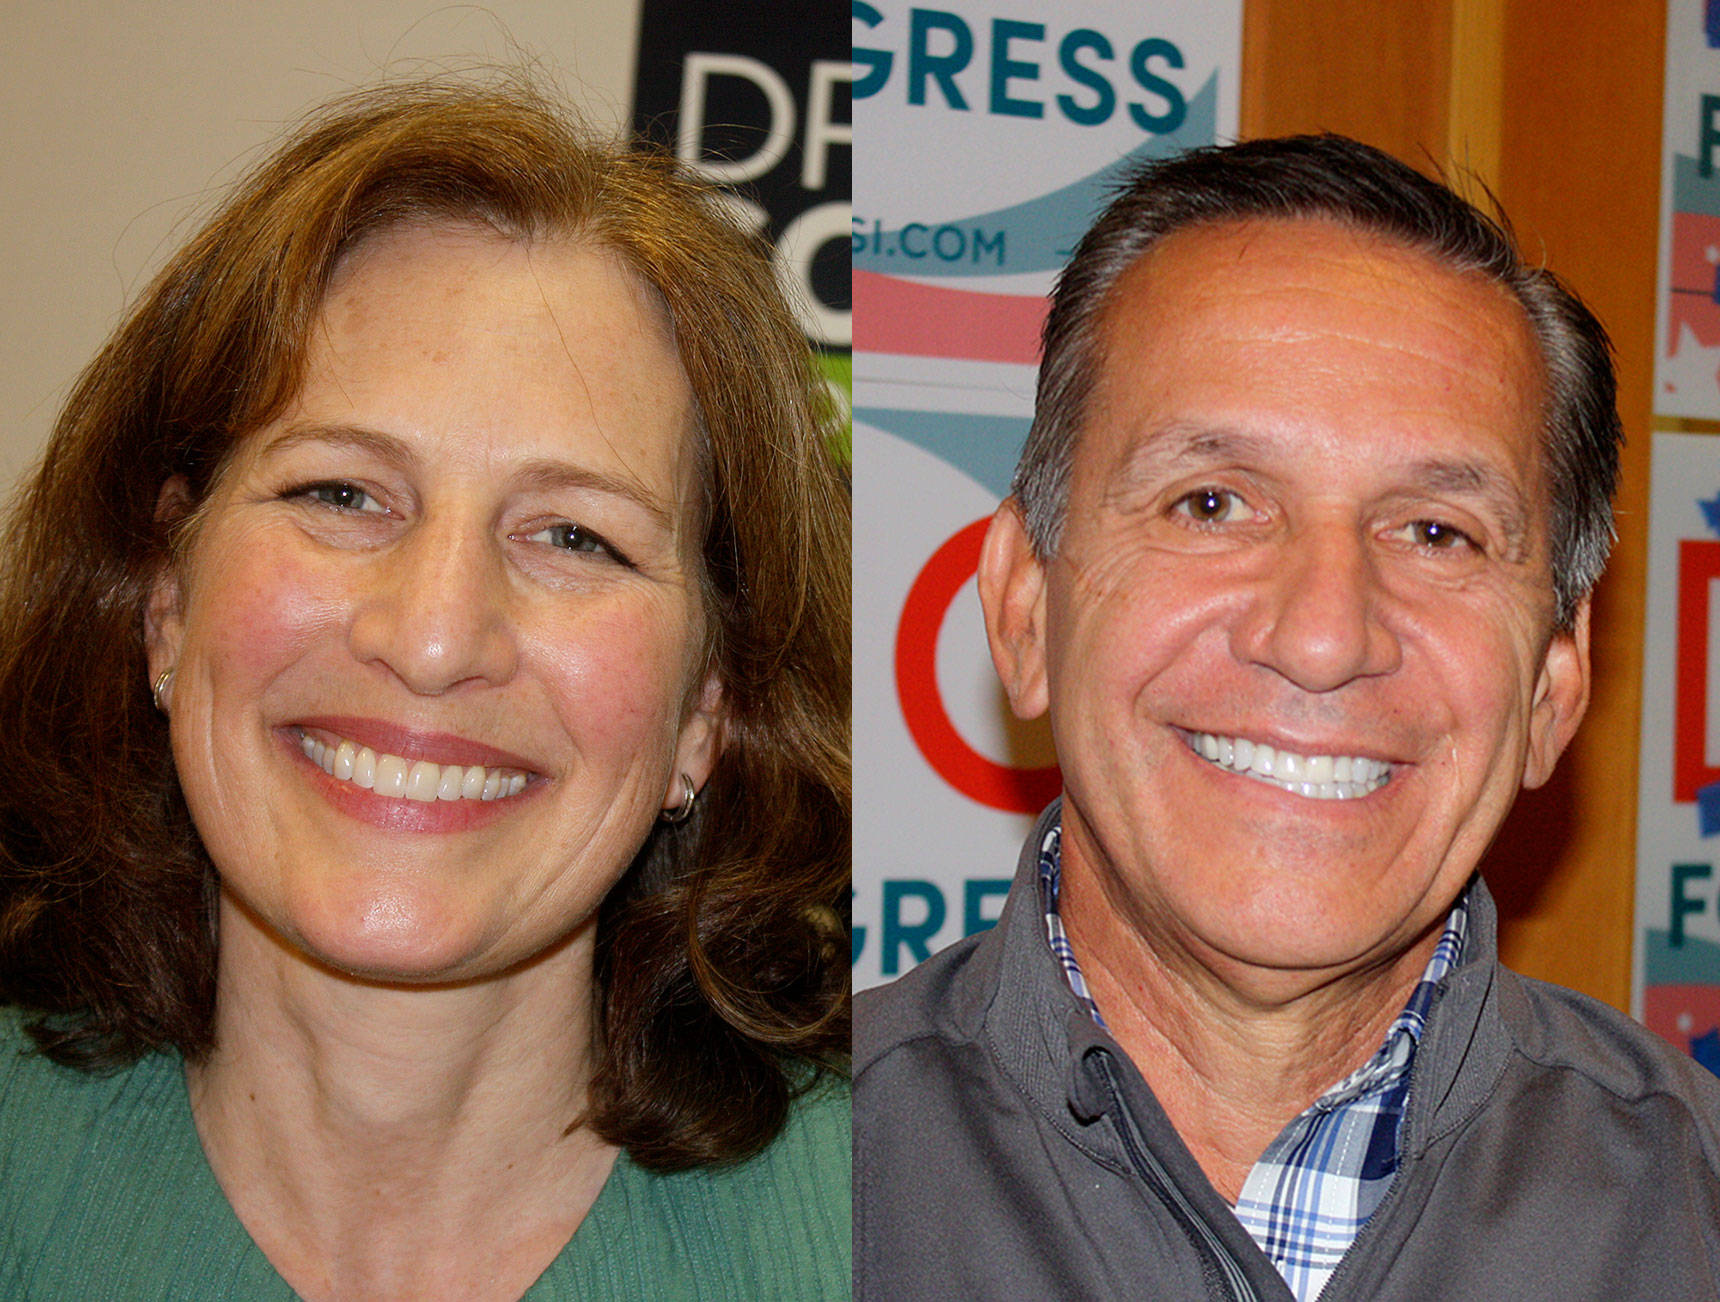 Kim Schrier (D) and Dino Rossi (R) are seeking to replace Dave Reichert in Washington’s 8th Congressional District. The district spans from eastern King and Pierce counties across the Cascades and into Chelan and Kittitas counties. Photos by John Stang